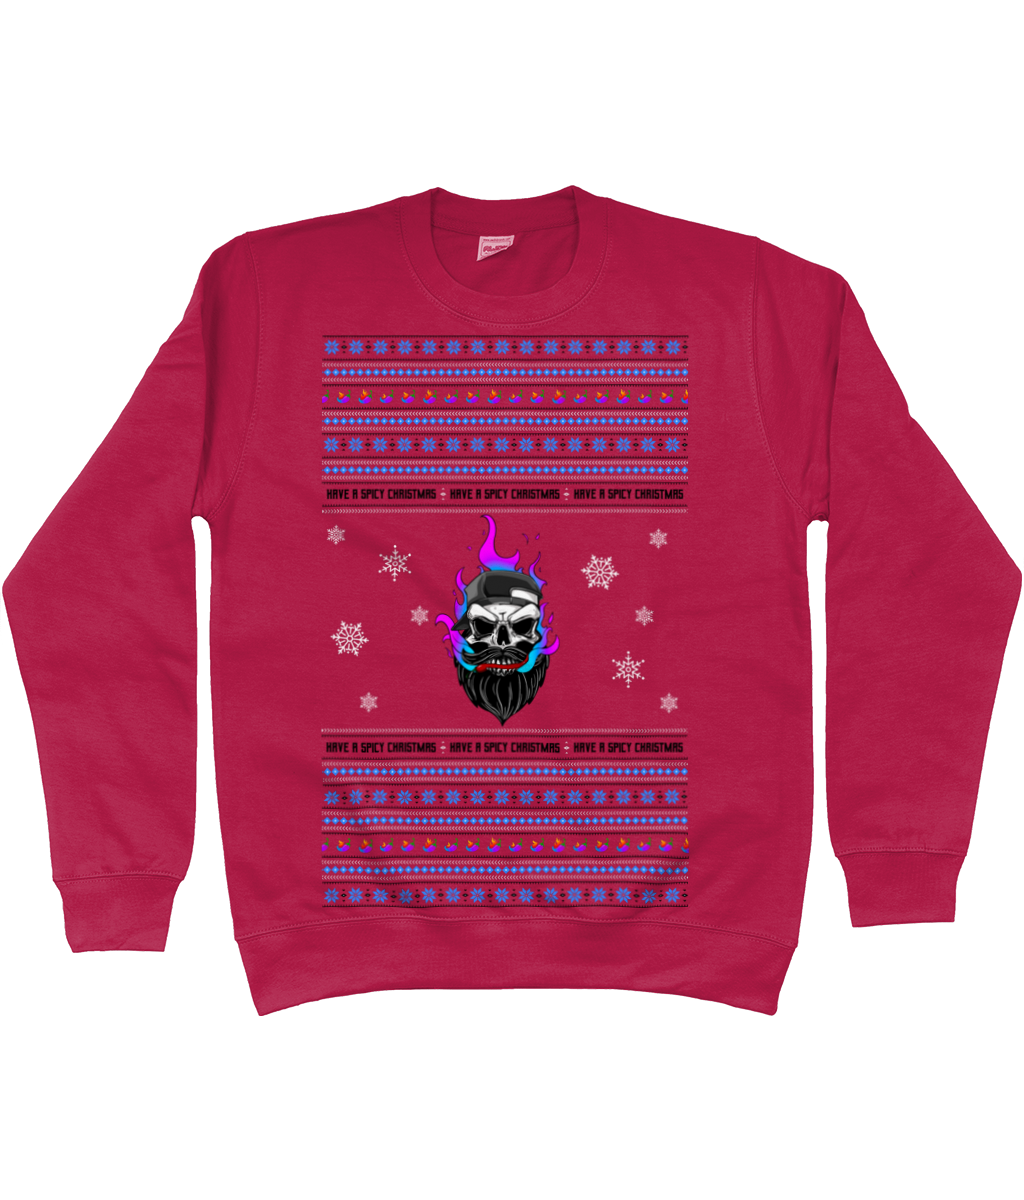 The Bropher's Grimm Ugly Christmas Jumper